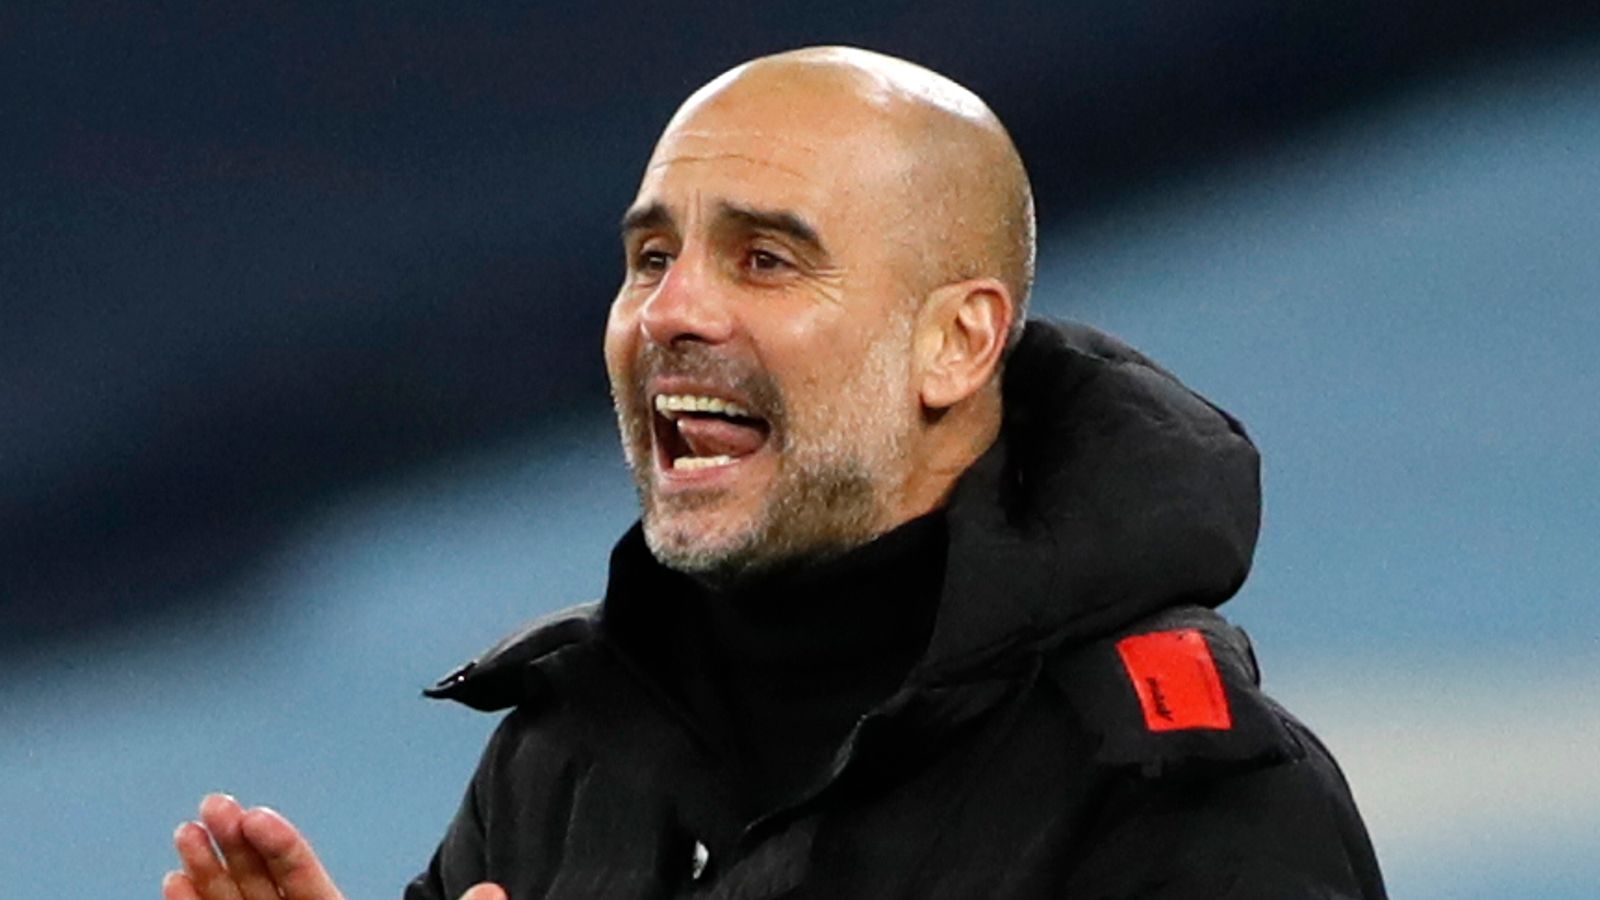 Pep Guardiola believes Manchester City has the potential to write another chapter in European history